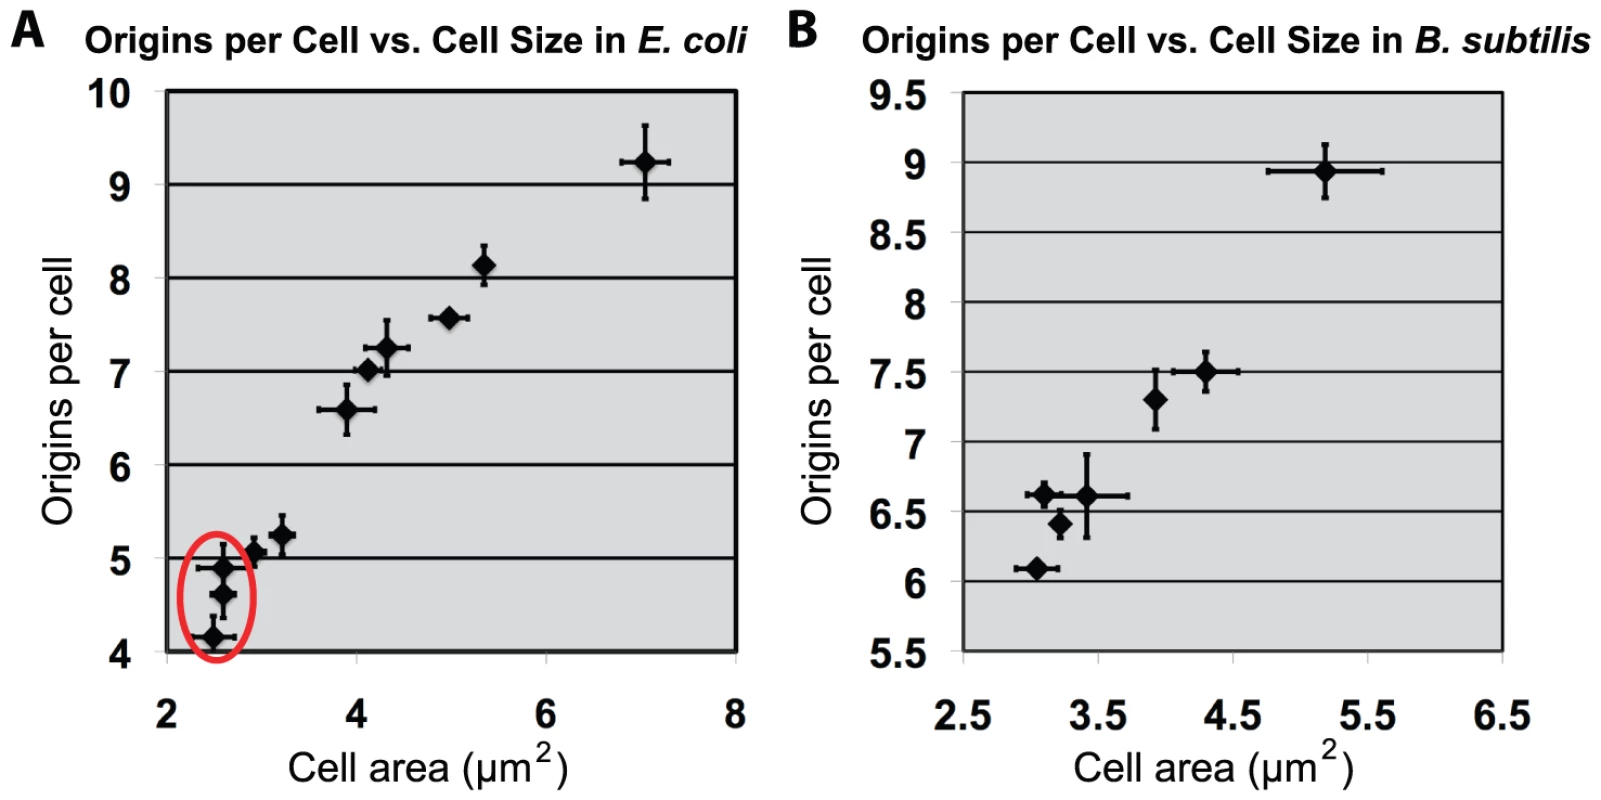 Increasing cell size results in proportional increase of initiations for both <i>E. coli</i> and <i>B. subtilis</i>.